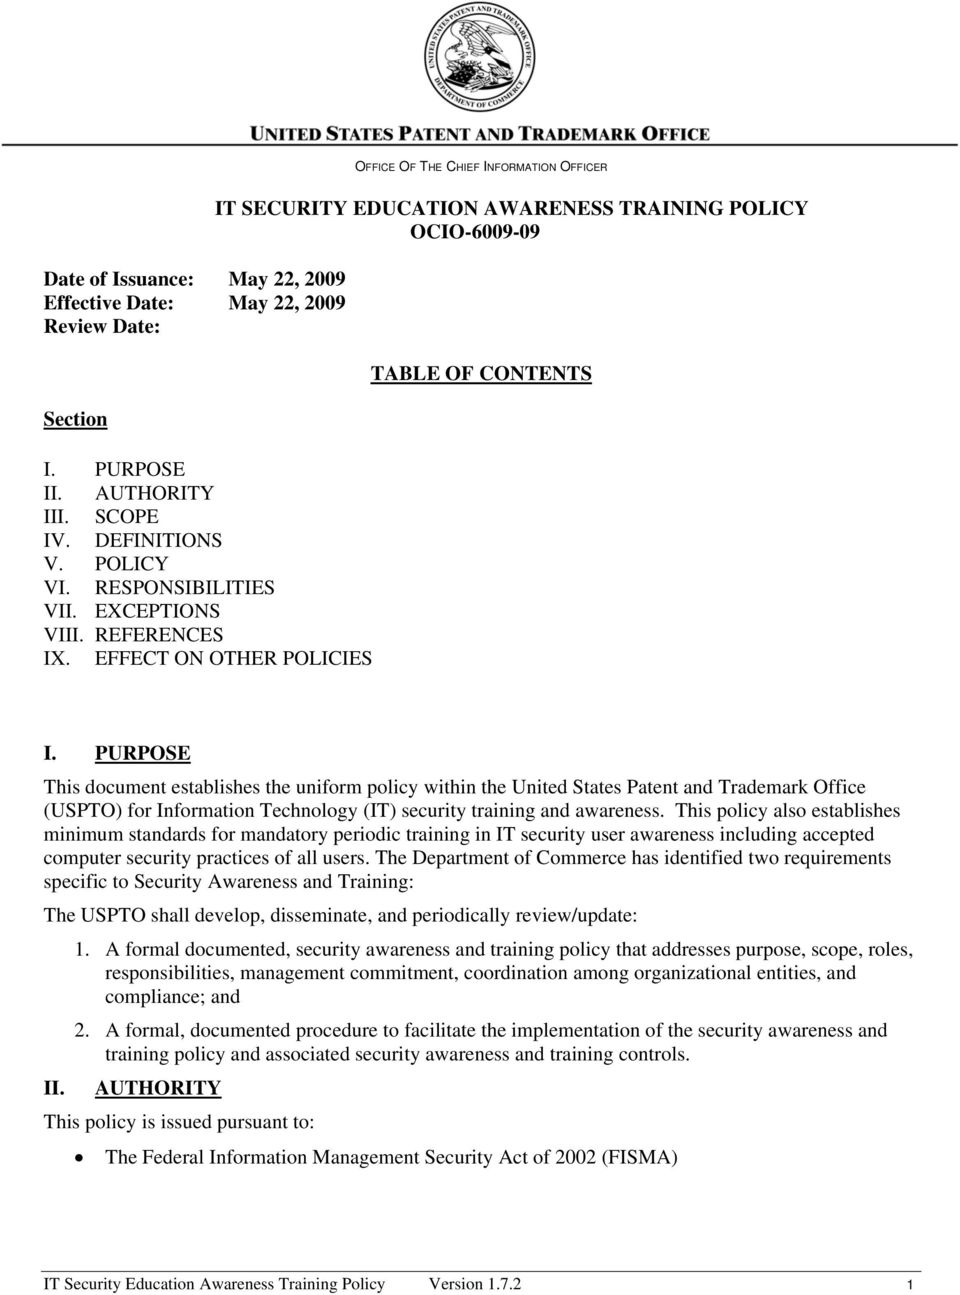 PURPOSE This document establishes the uniform policy within the United States Patent and Trademark Office (USPTO) for Information Technology (IT) security training and awareness.